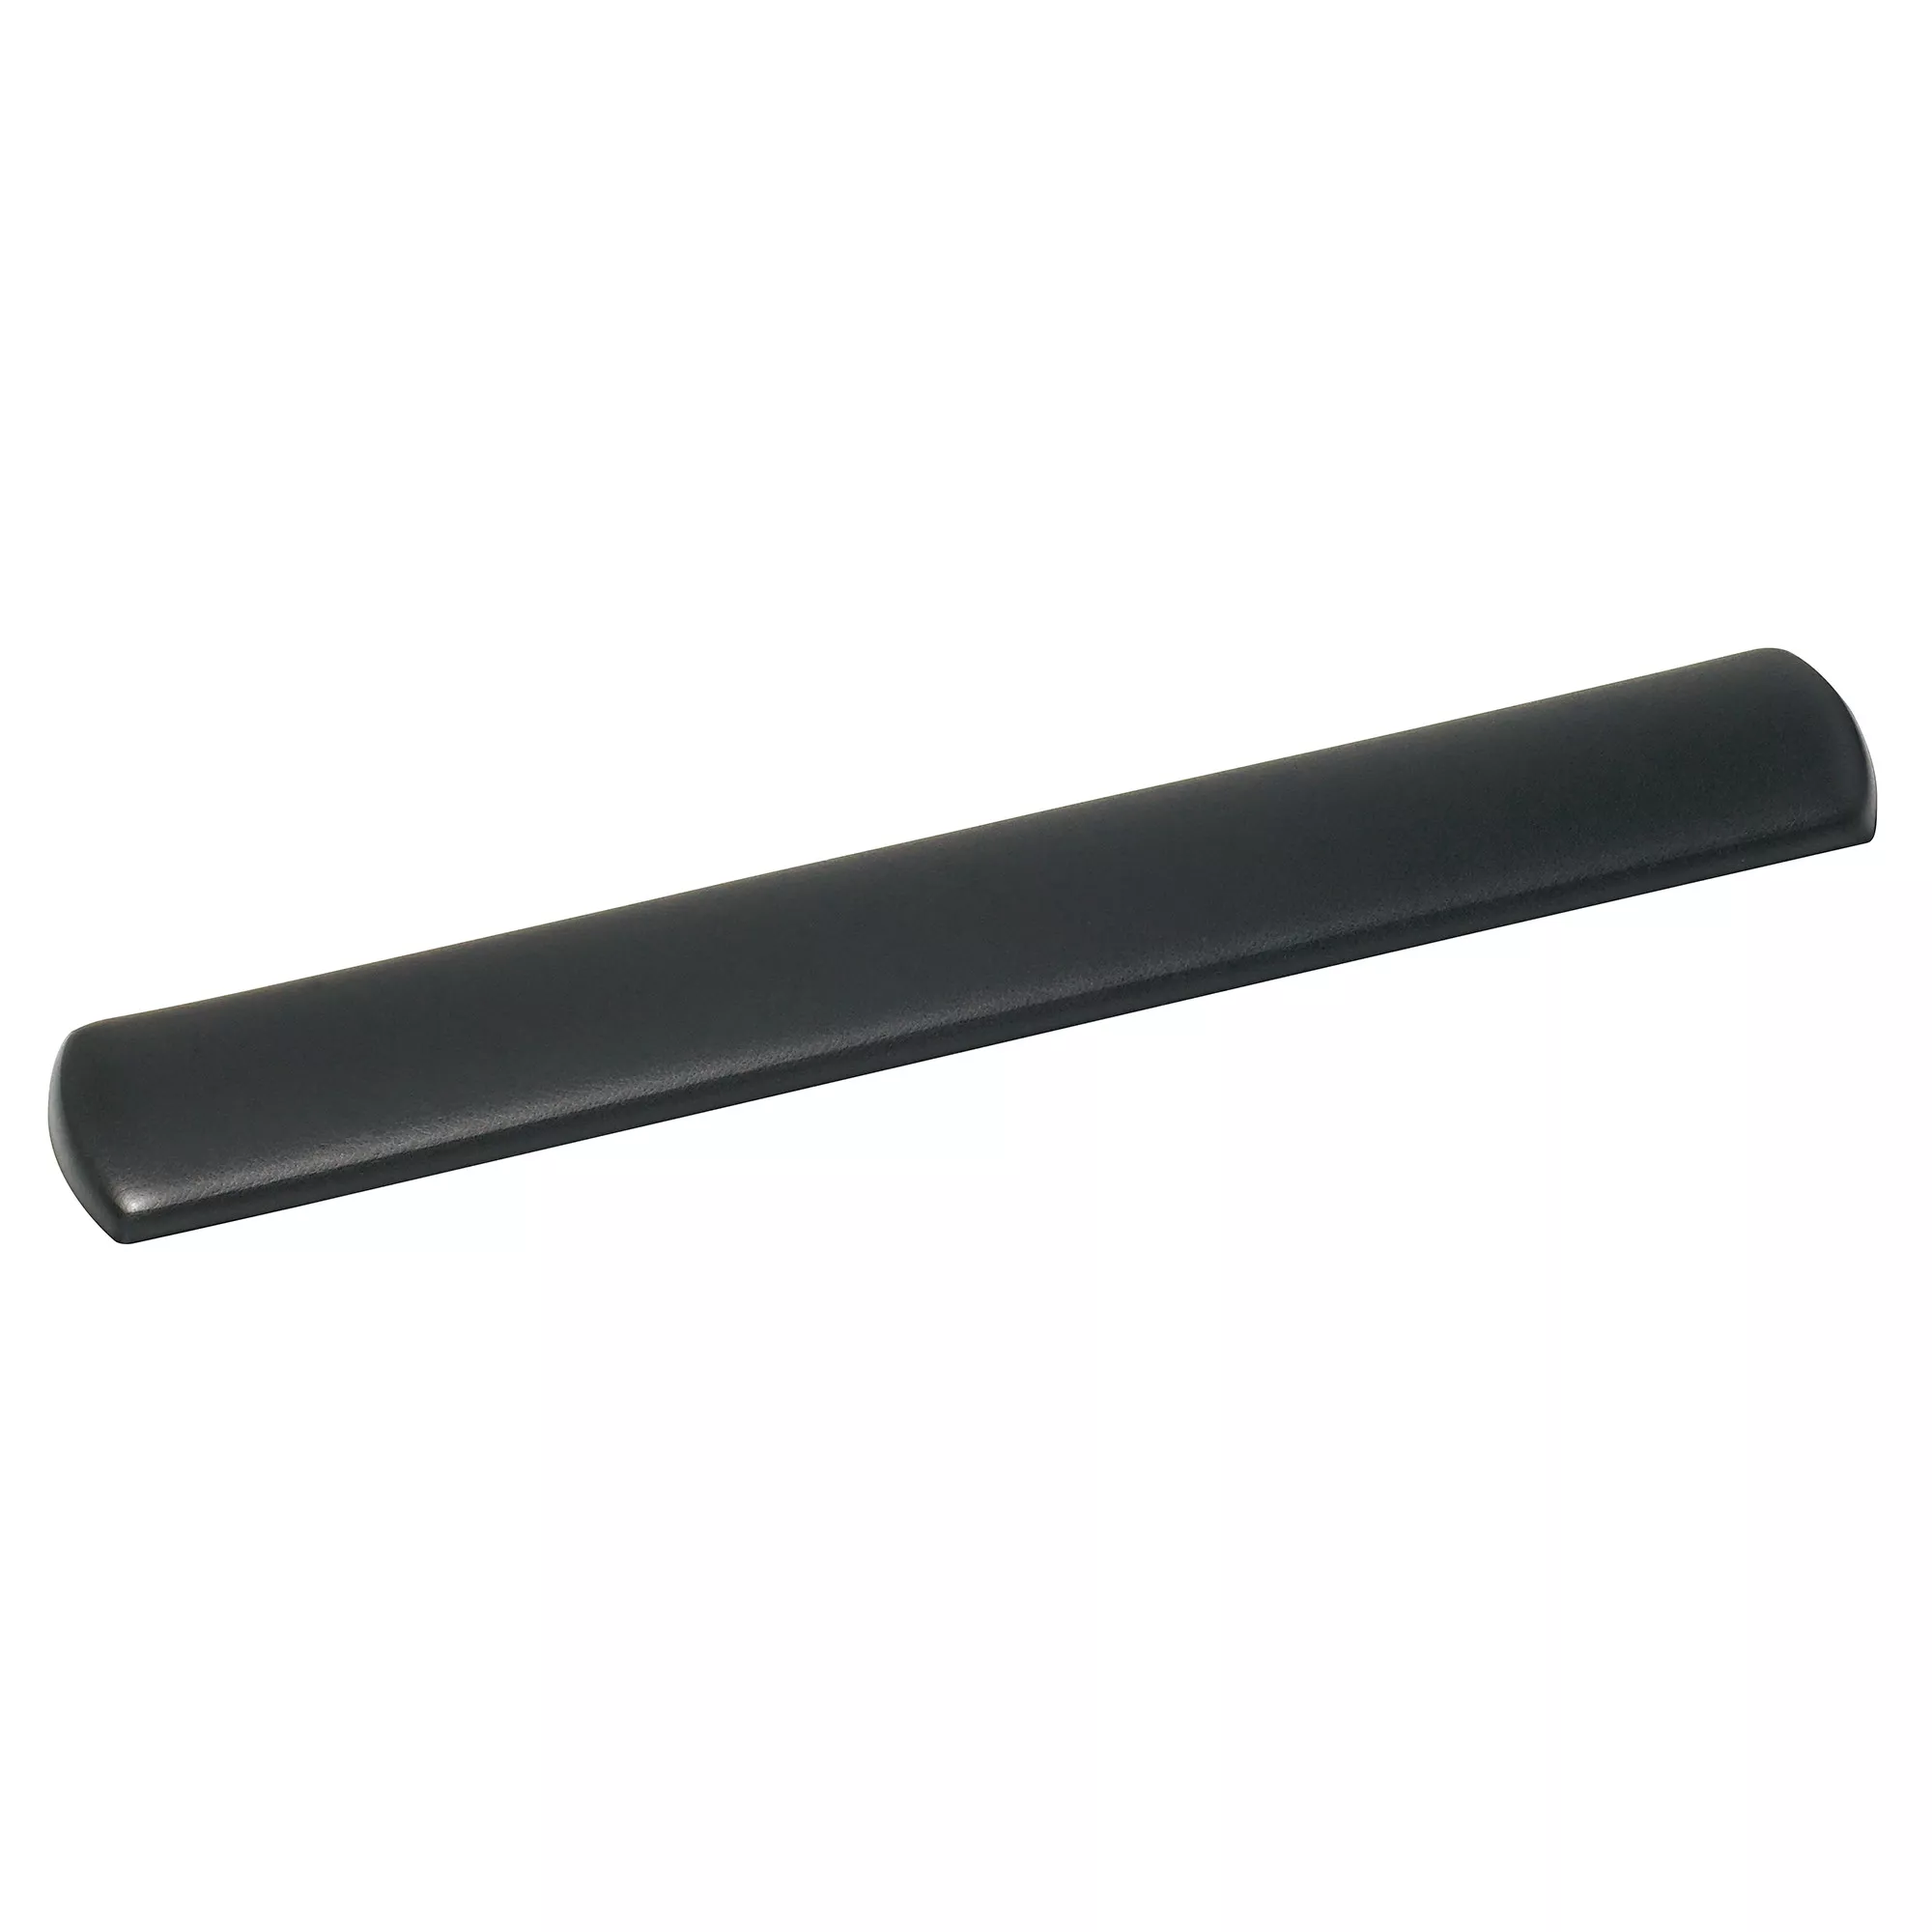 3M™ Gel Wrist Rest for Keyboard with Leatherette Cover and Antimicrobial
Product Protection, WR310LE